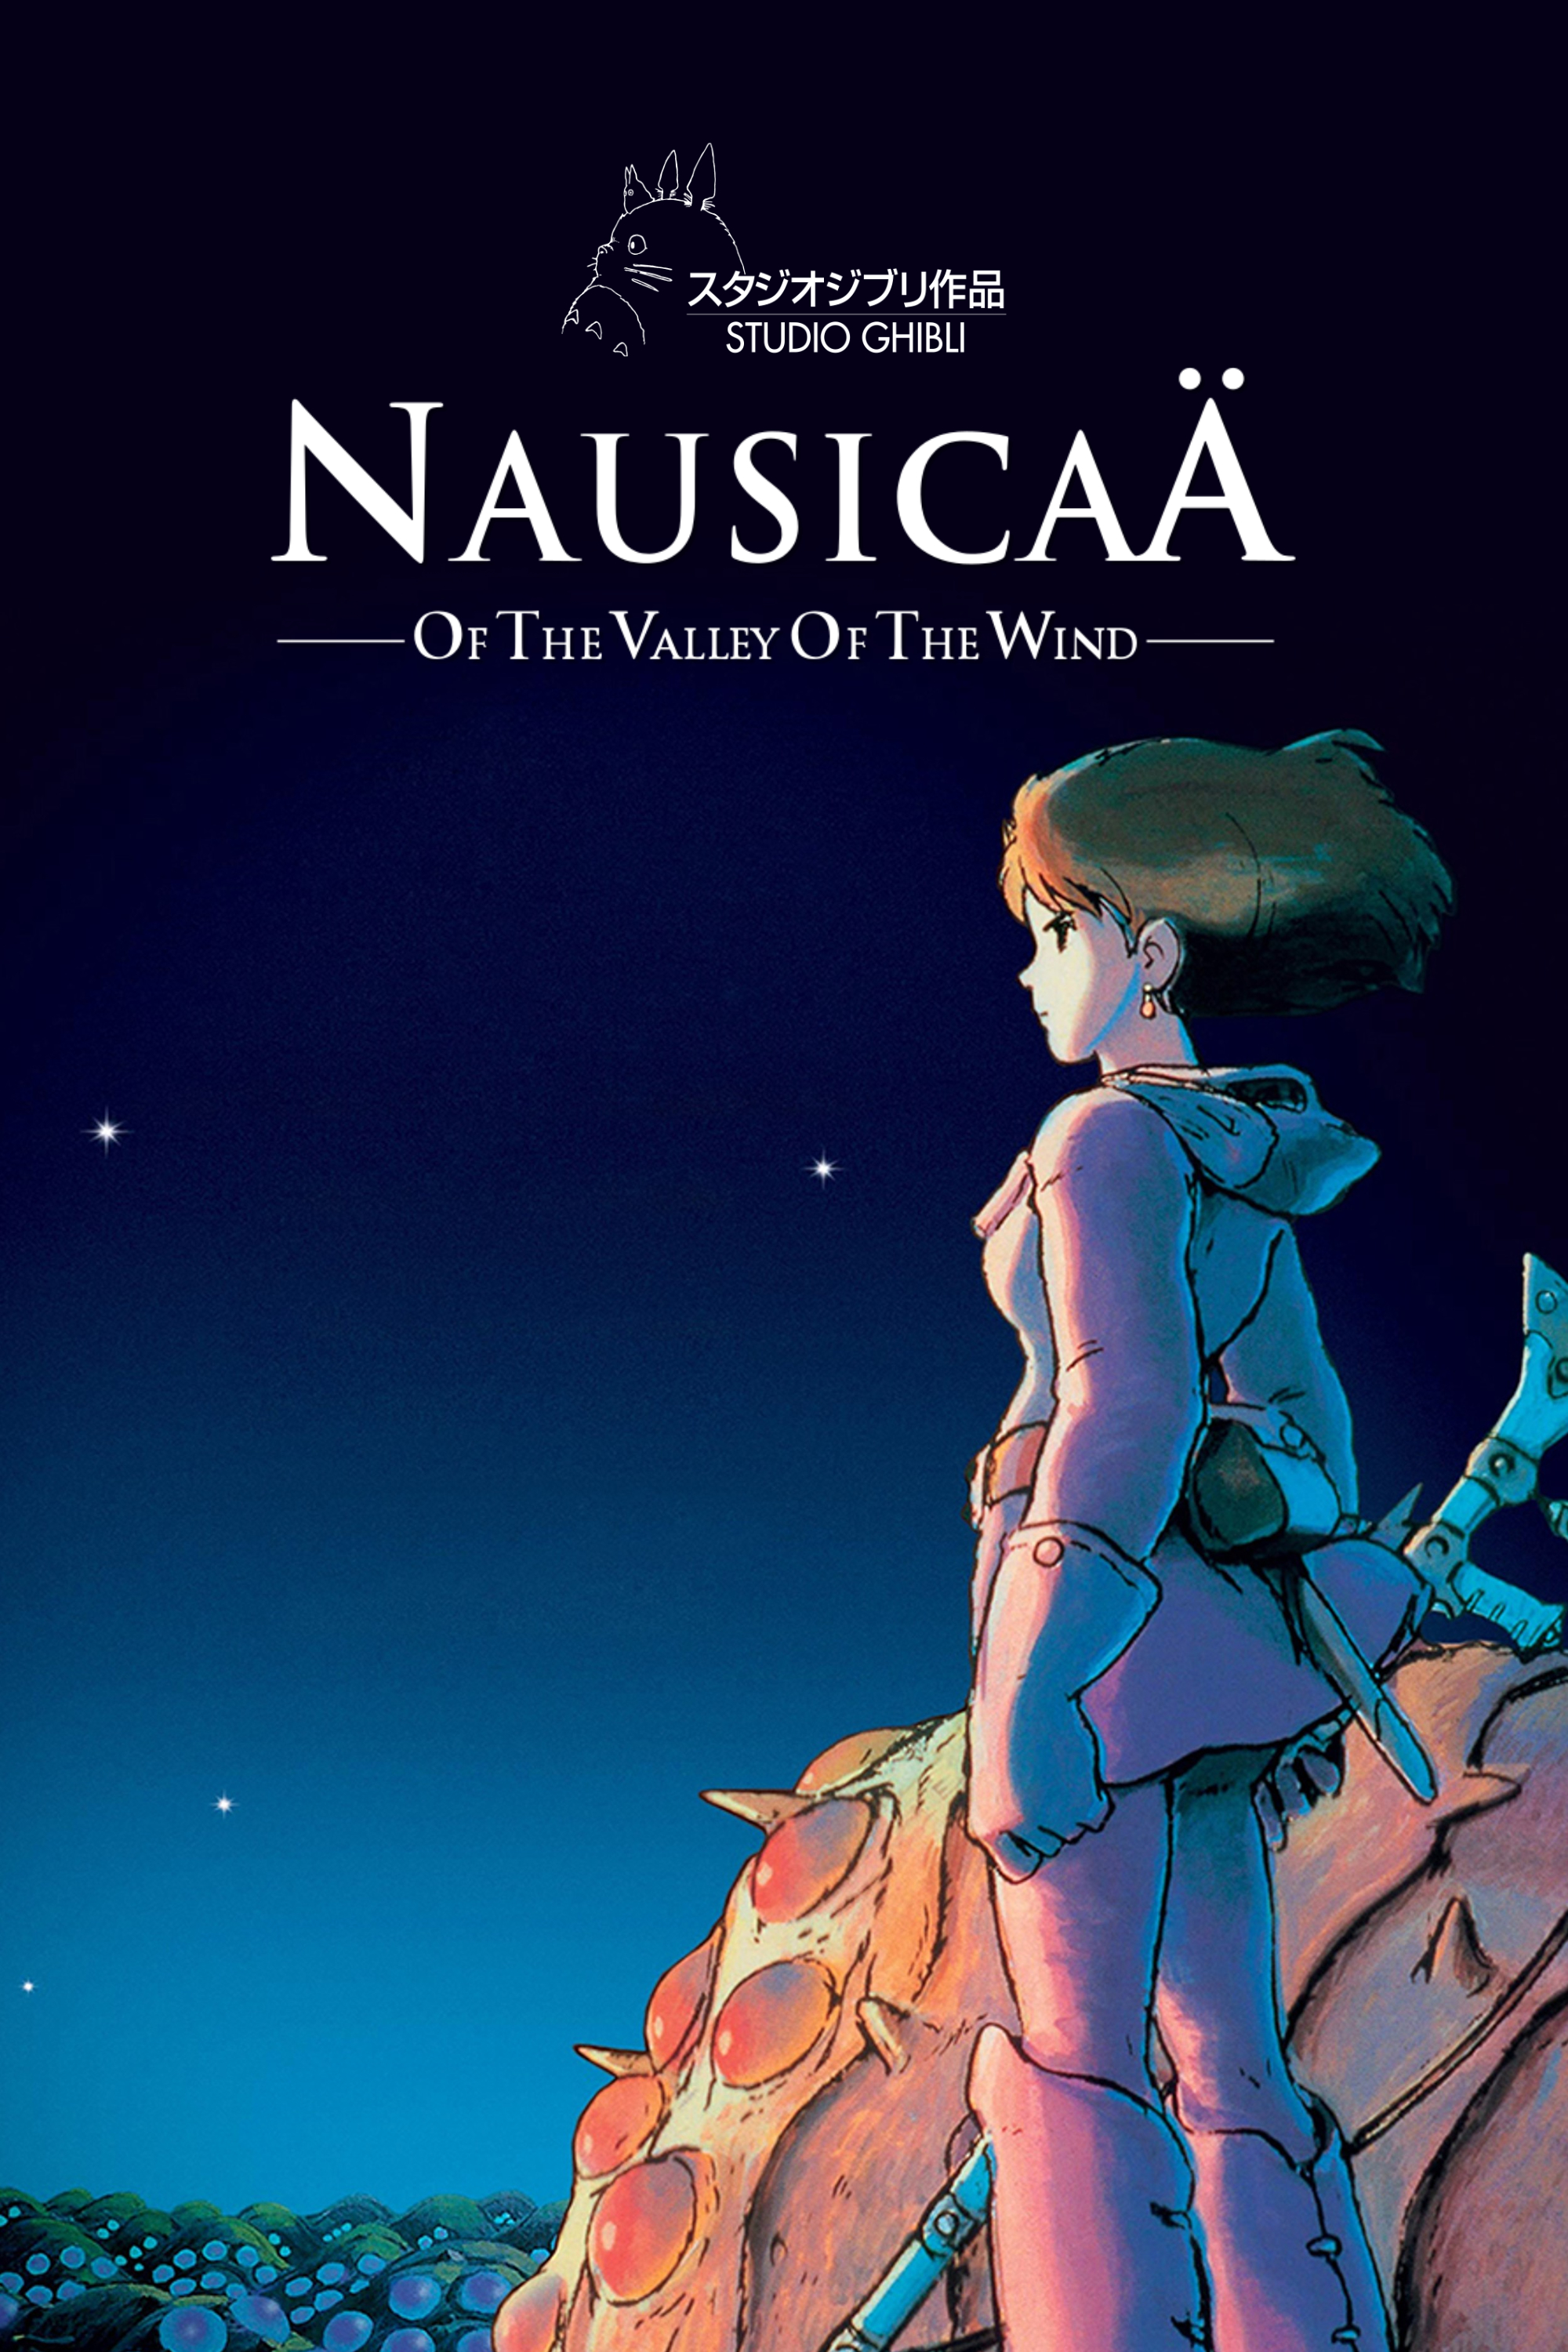 Film poster for NAUSICAÄ OF THE VALLEY OF THE WIND (1984)